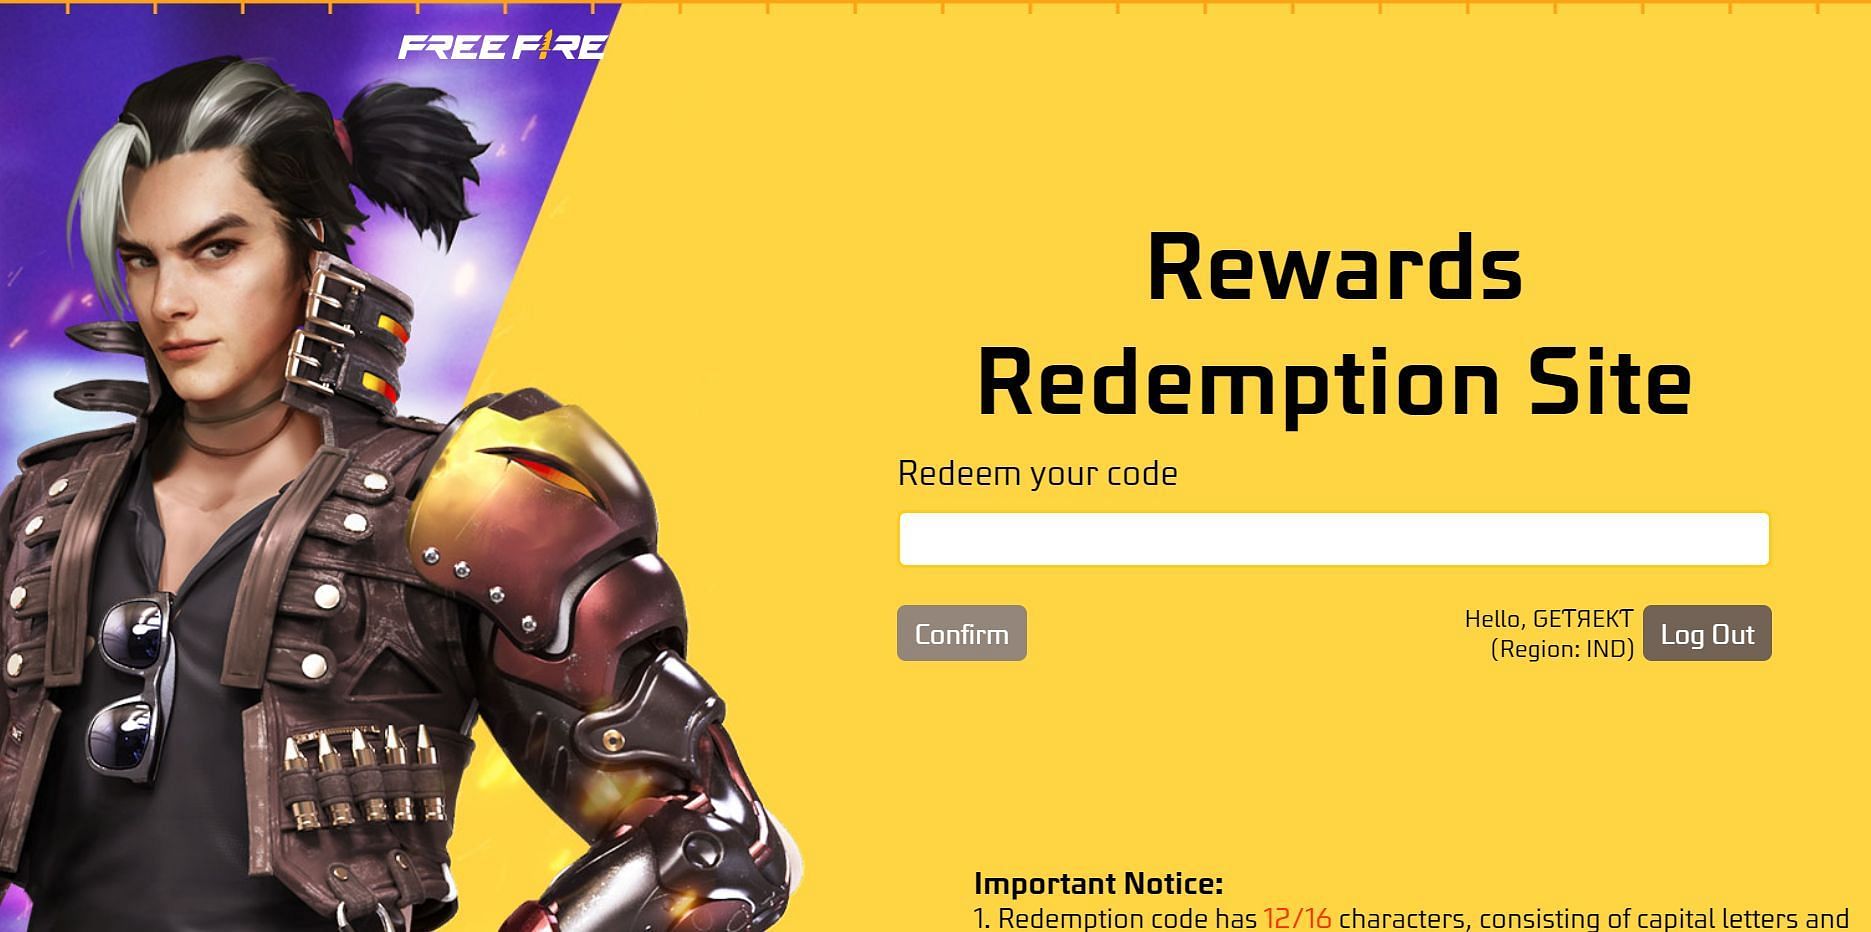 Enter the redemption code correctly in the text field (Image via Garena)